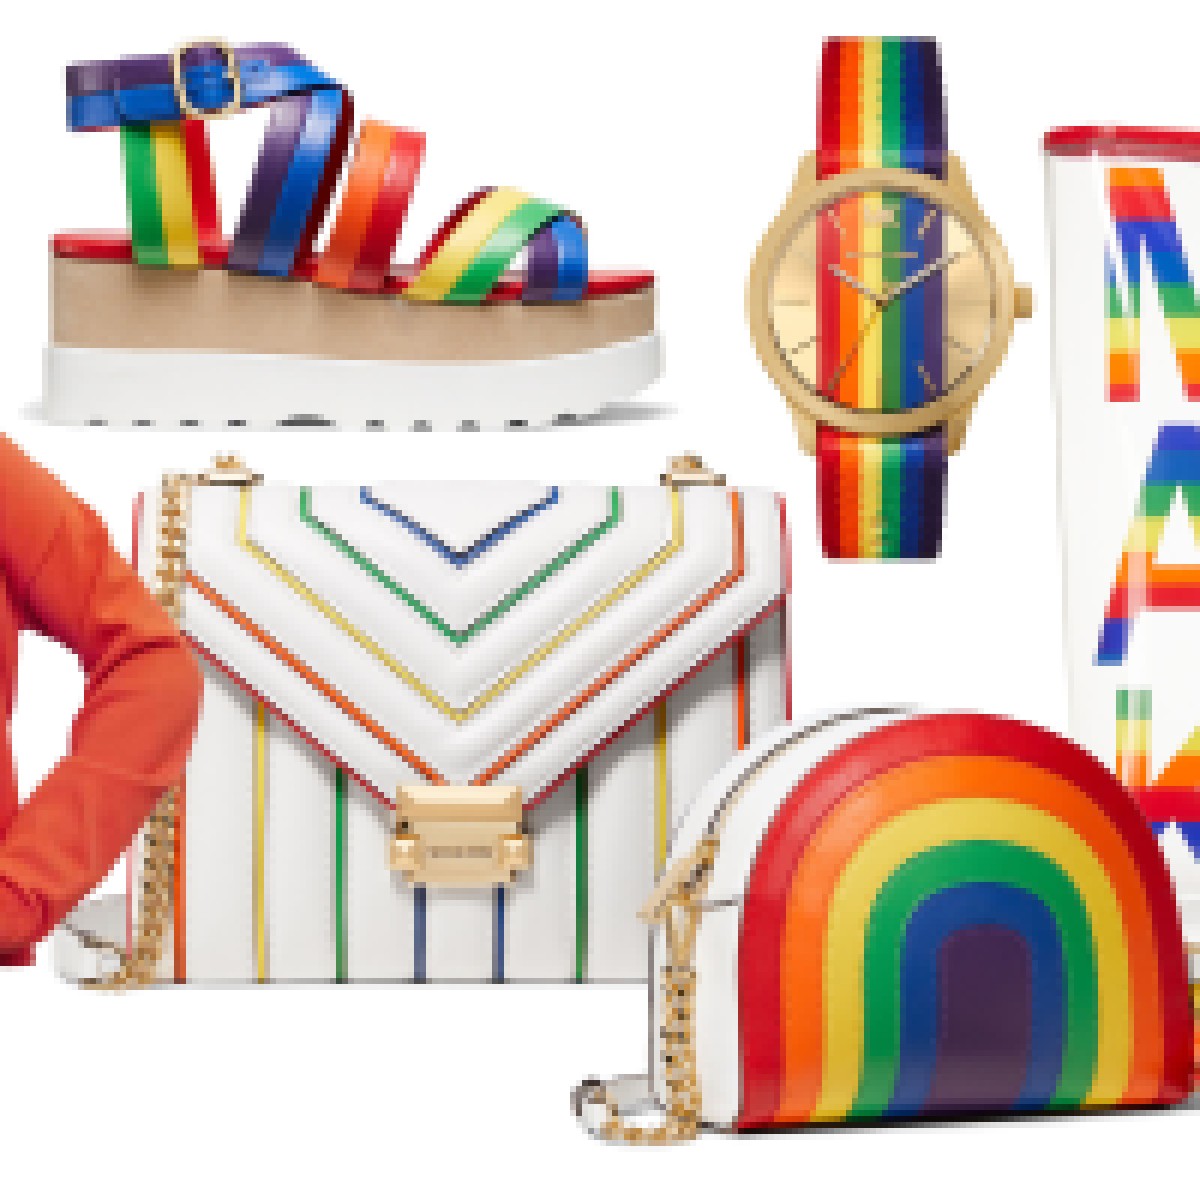 Michael Kors launches #MKGO Rainbow collection